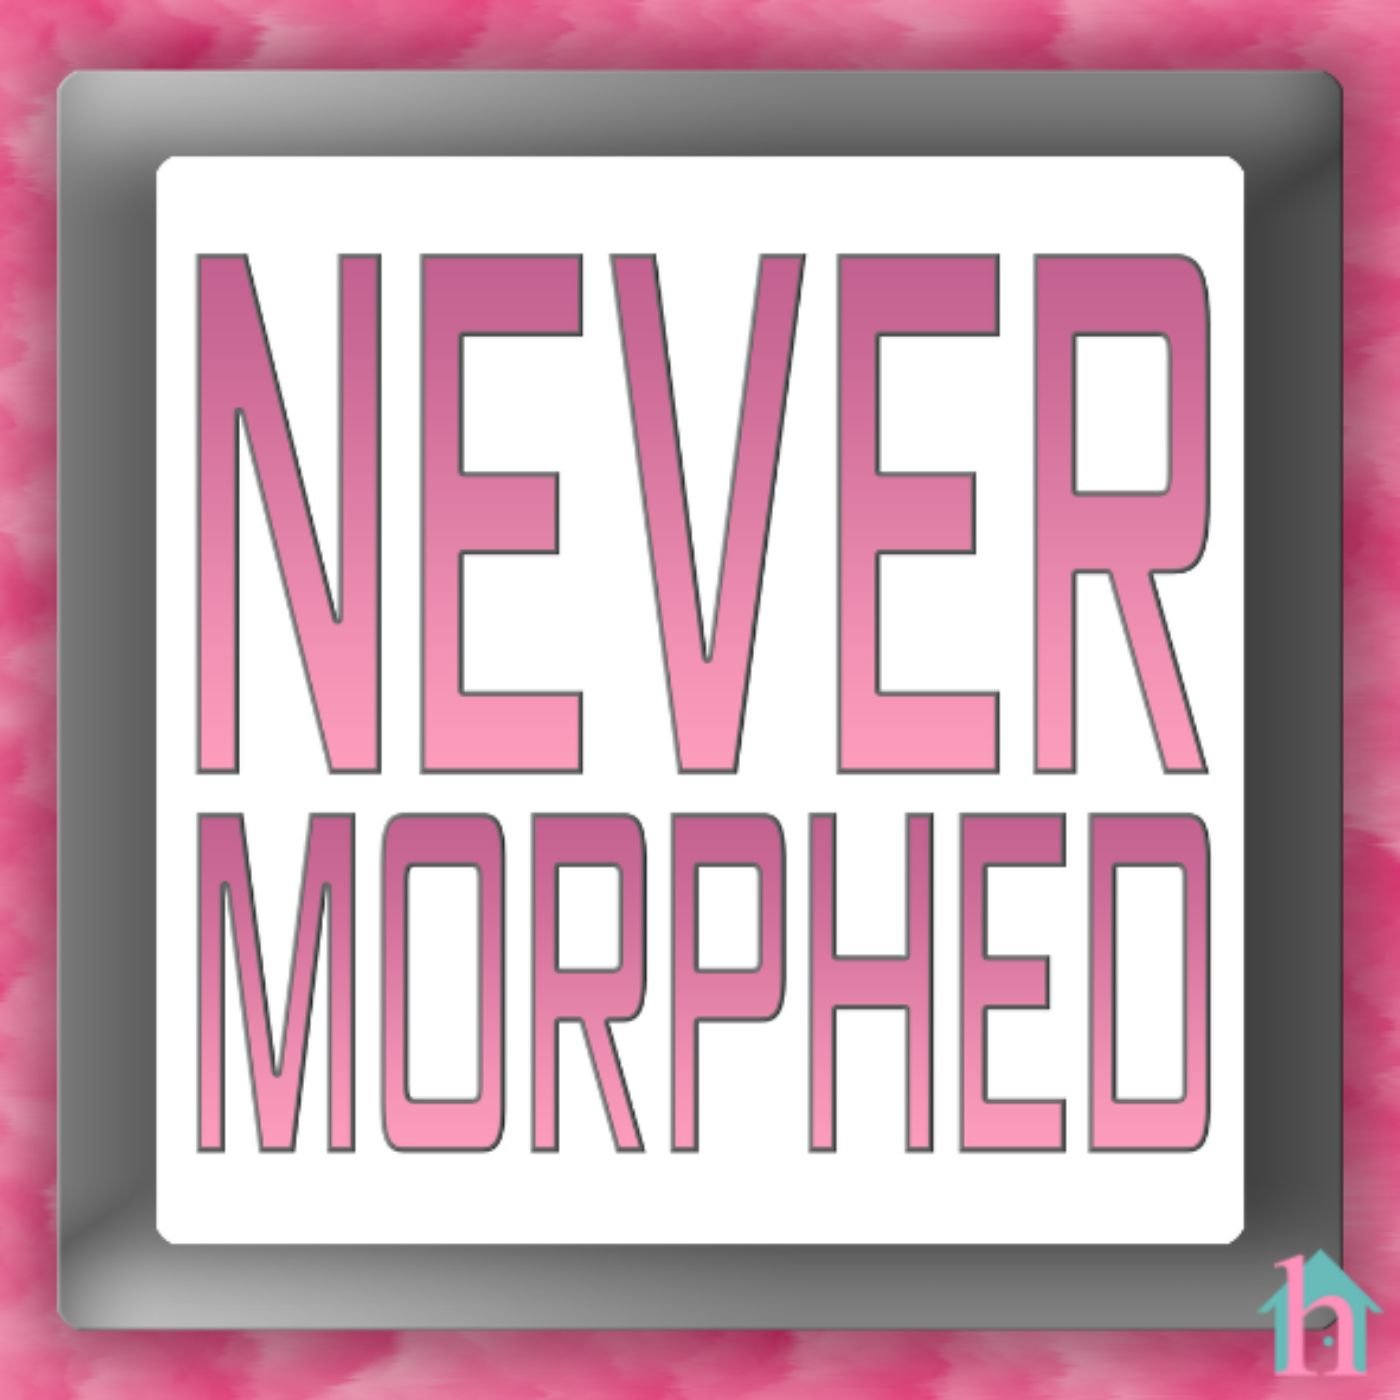 Coming soon: Nevermorphed